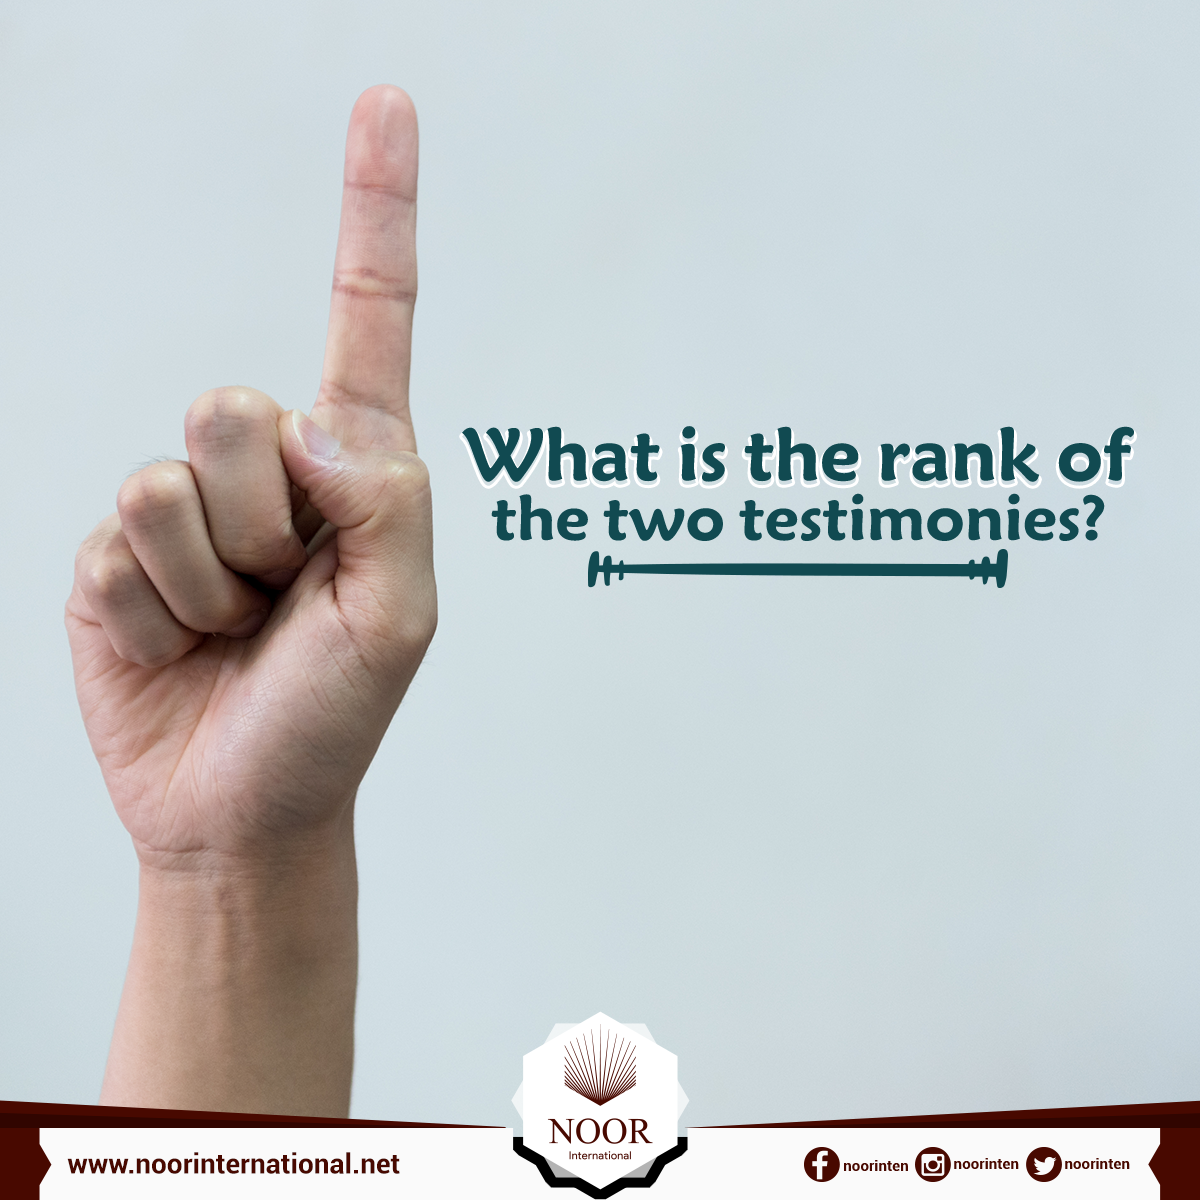 What is the rank of the two testimonies?